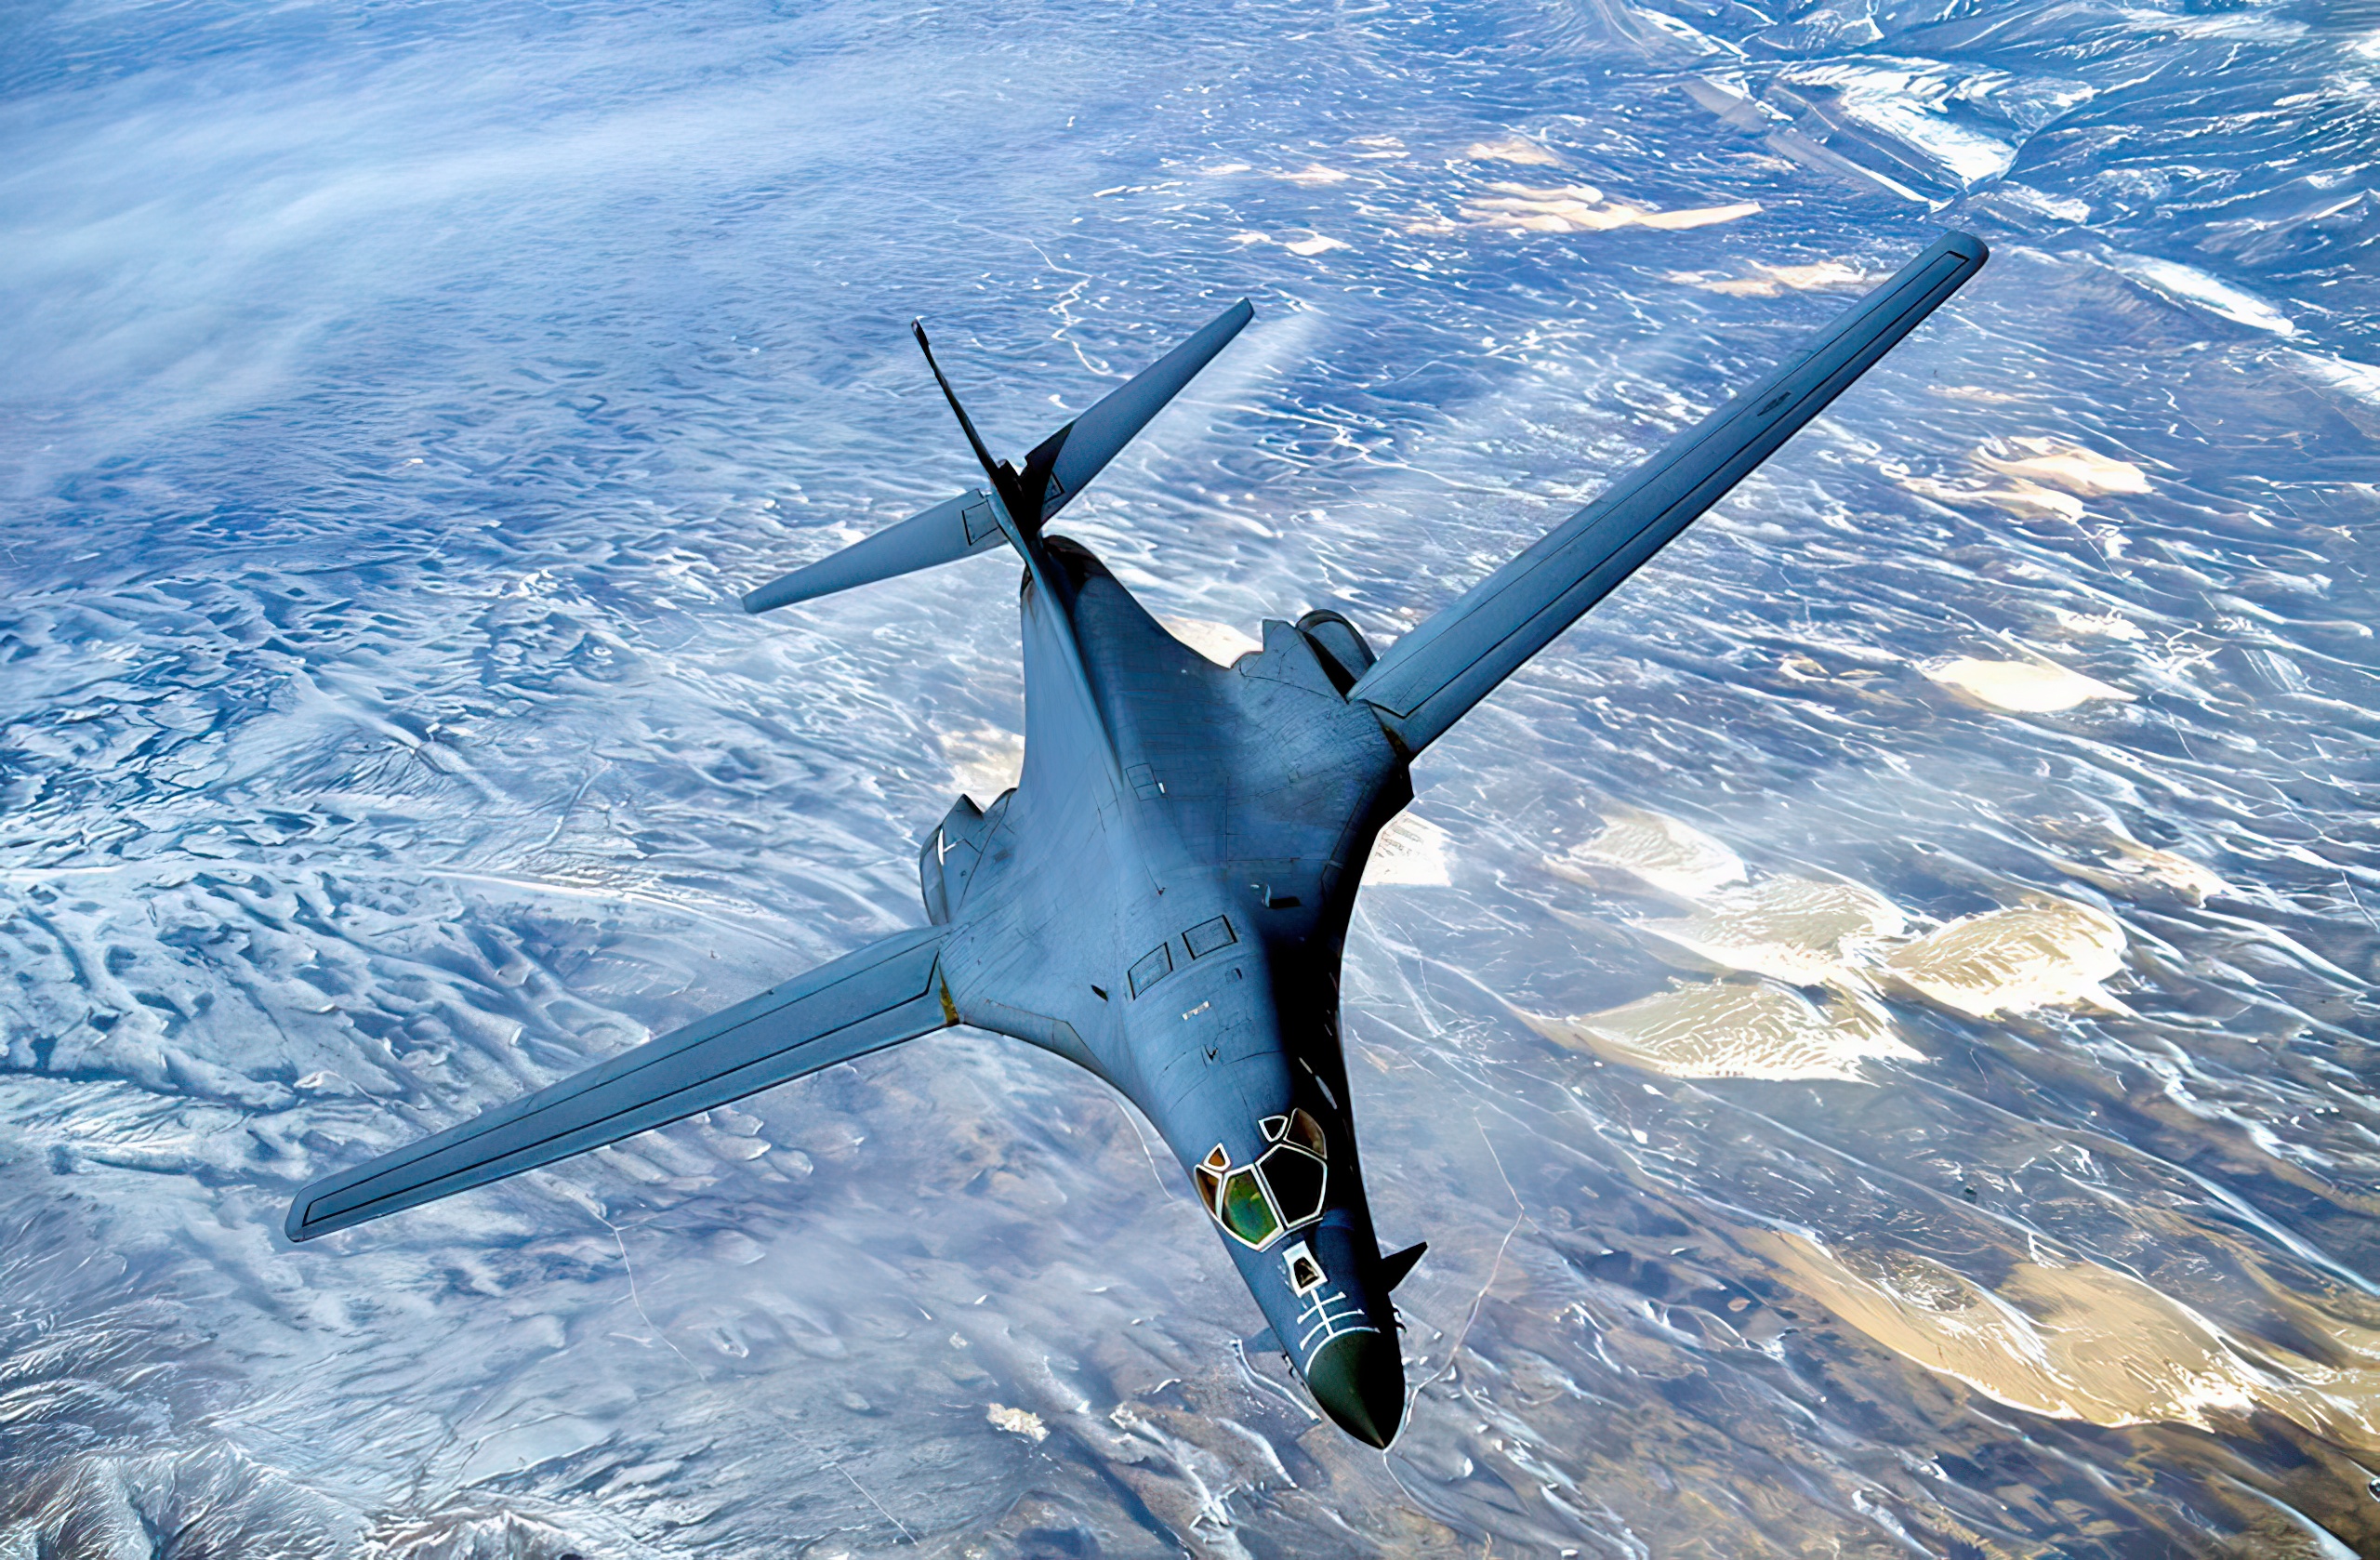 A B-1B with wings swept full forward